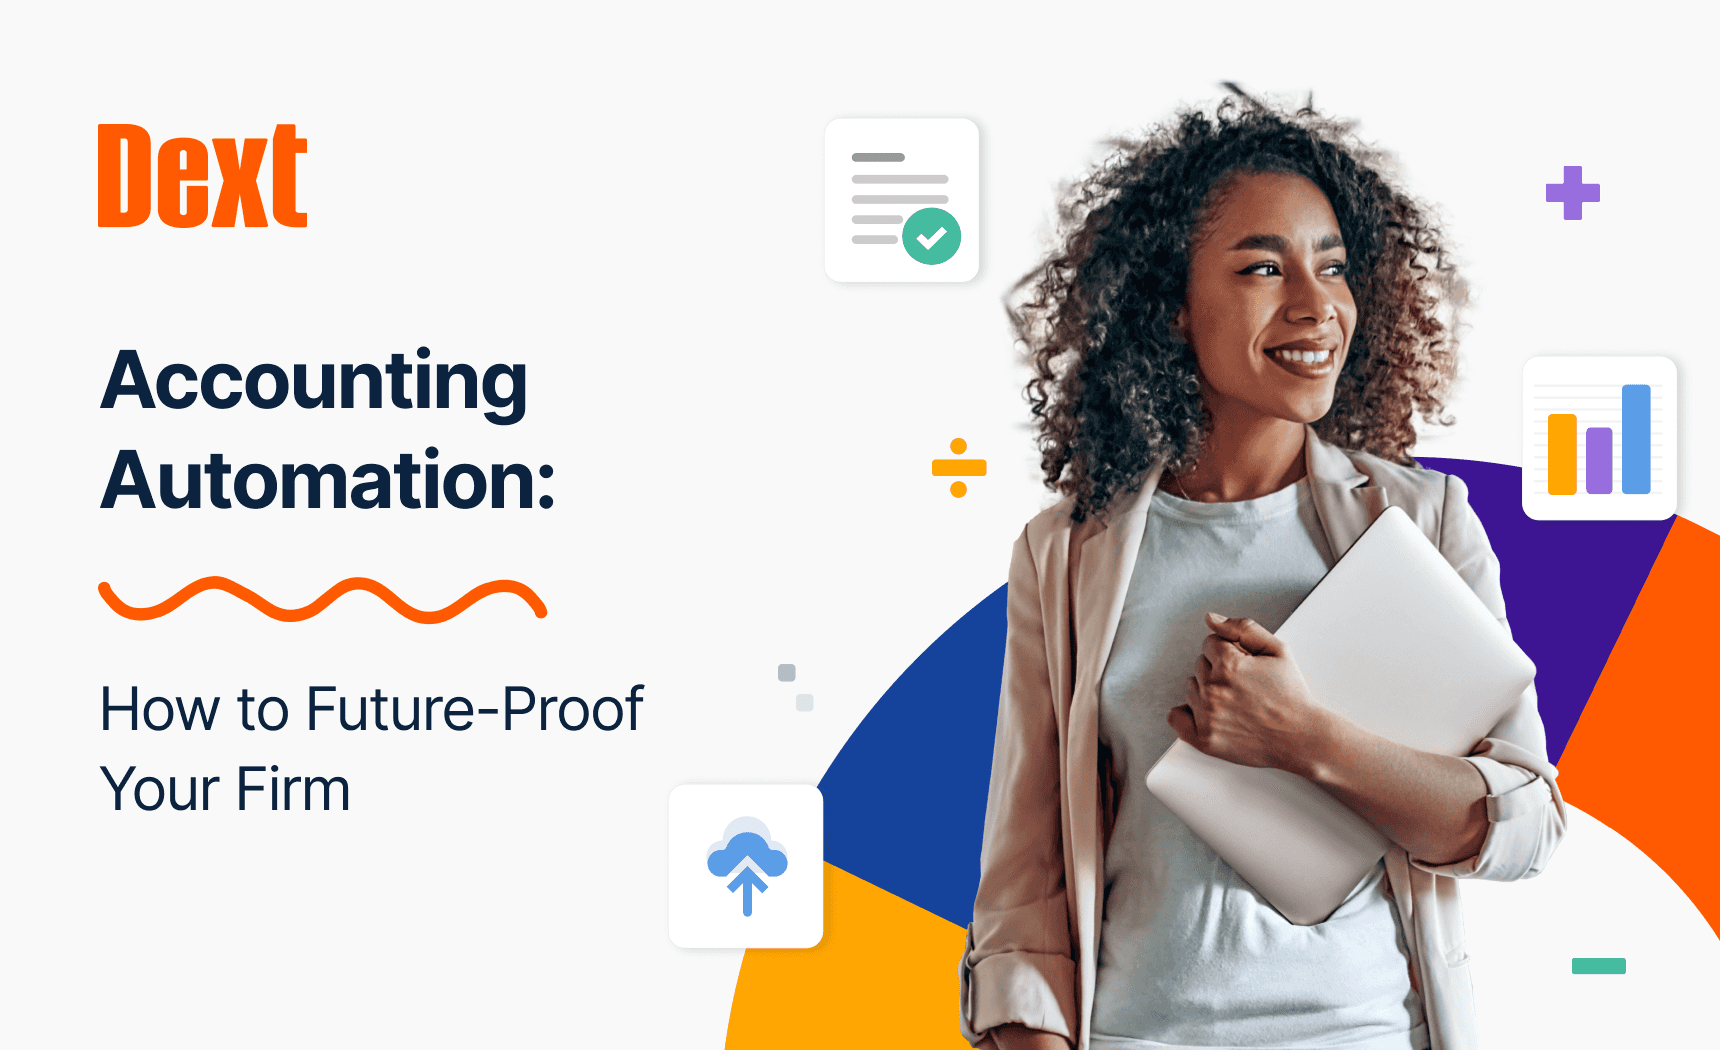 Accounting Automation: How to Future-Proof Your Firm